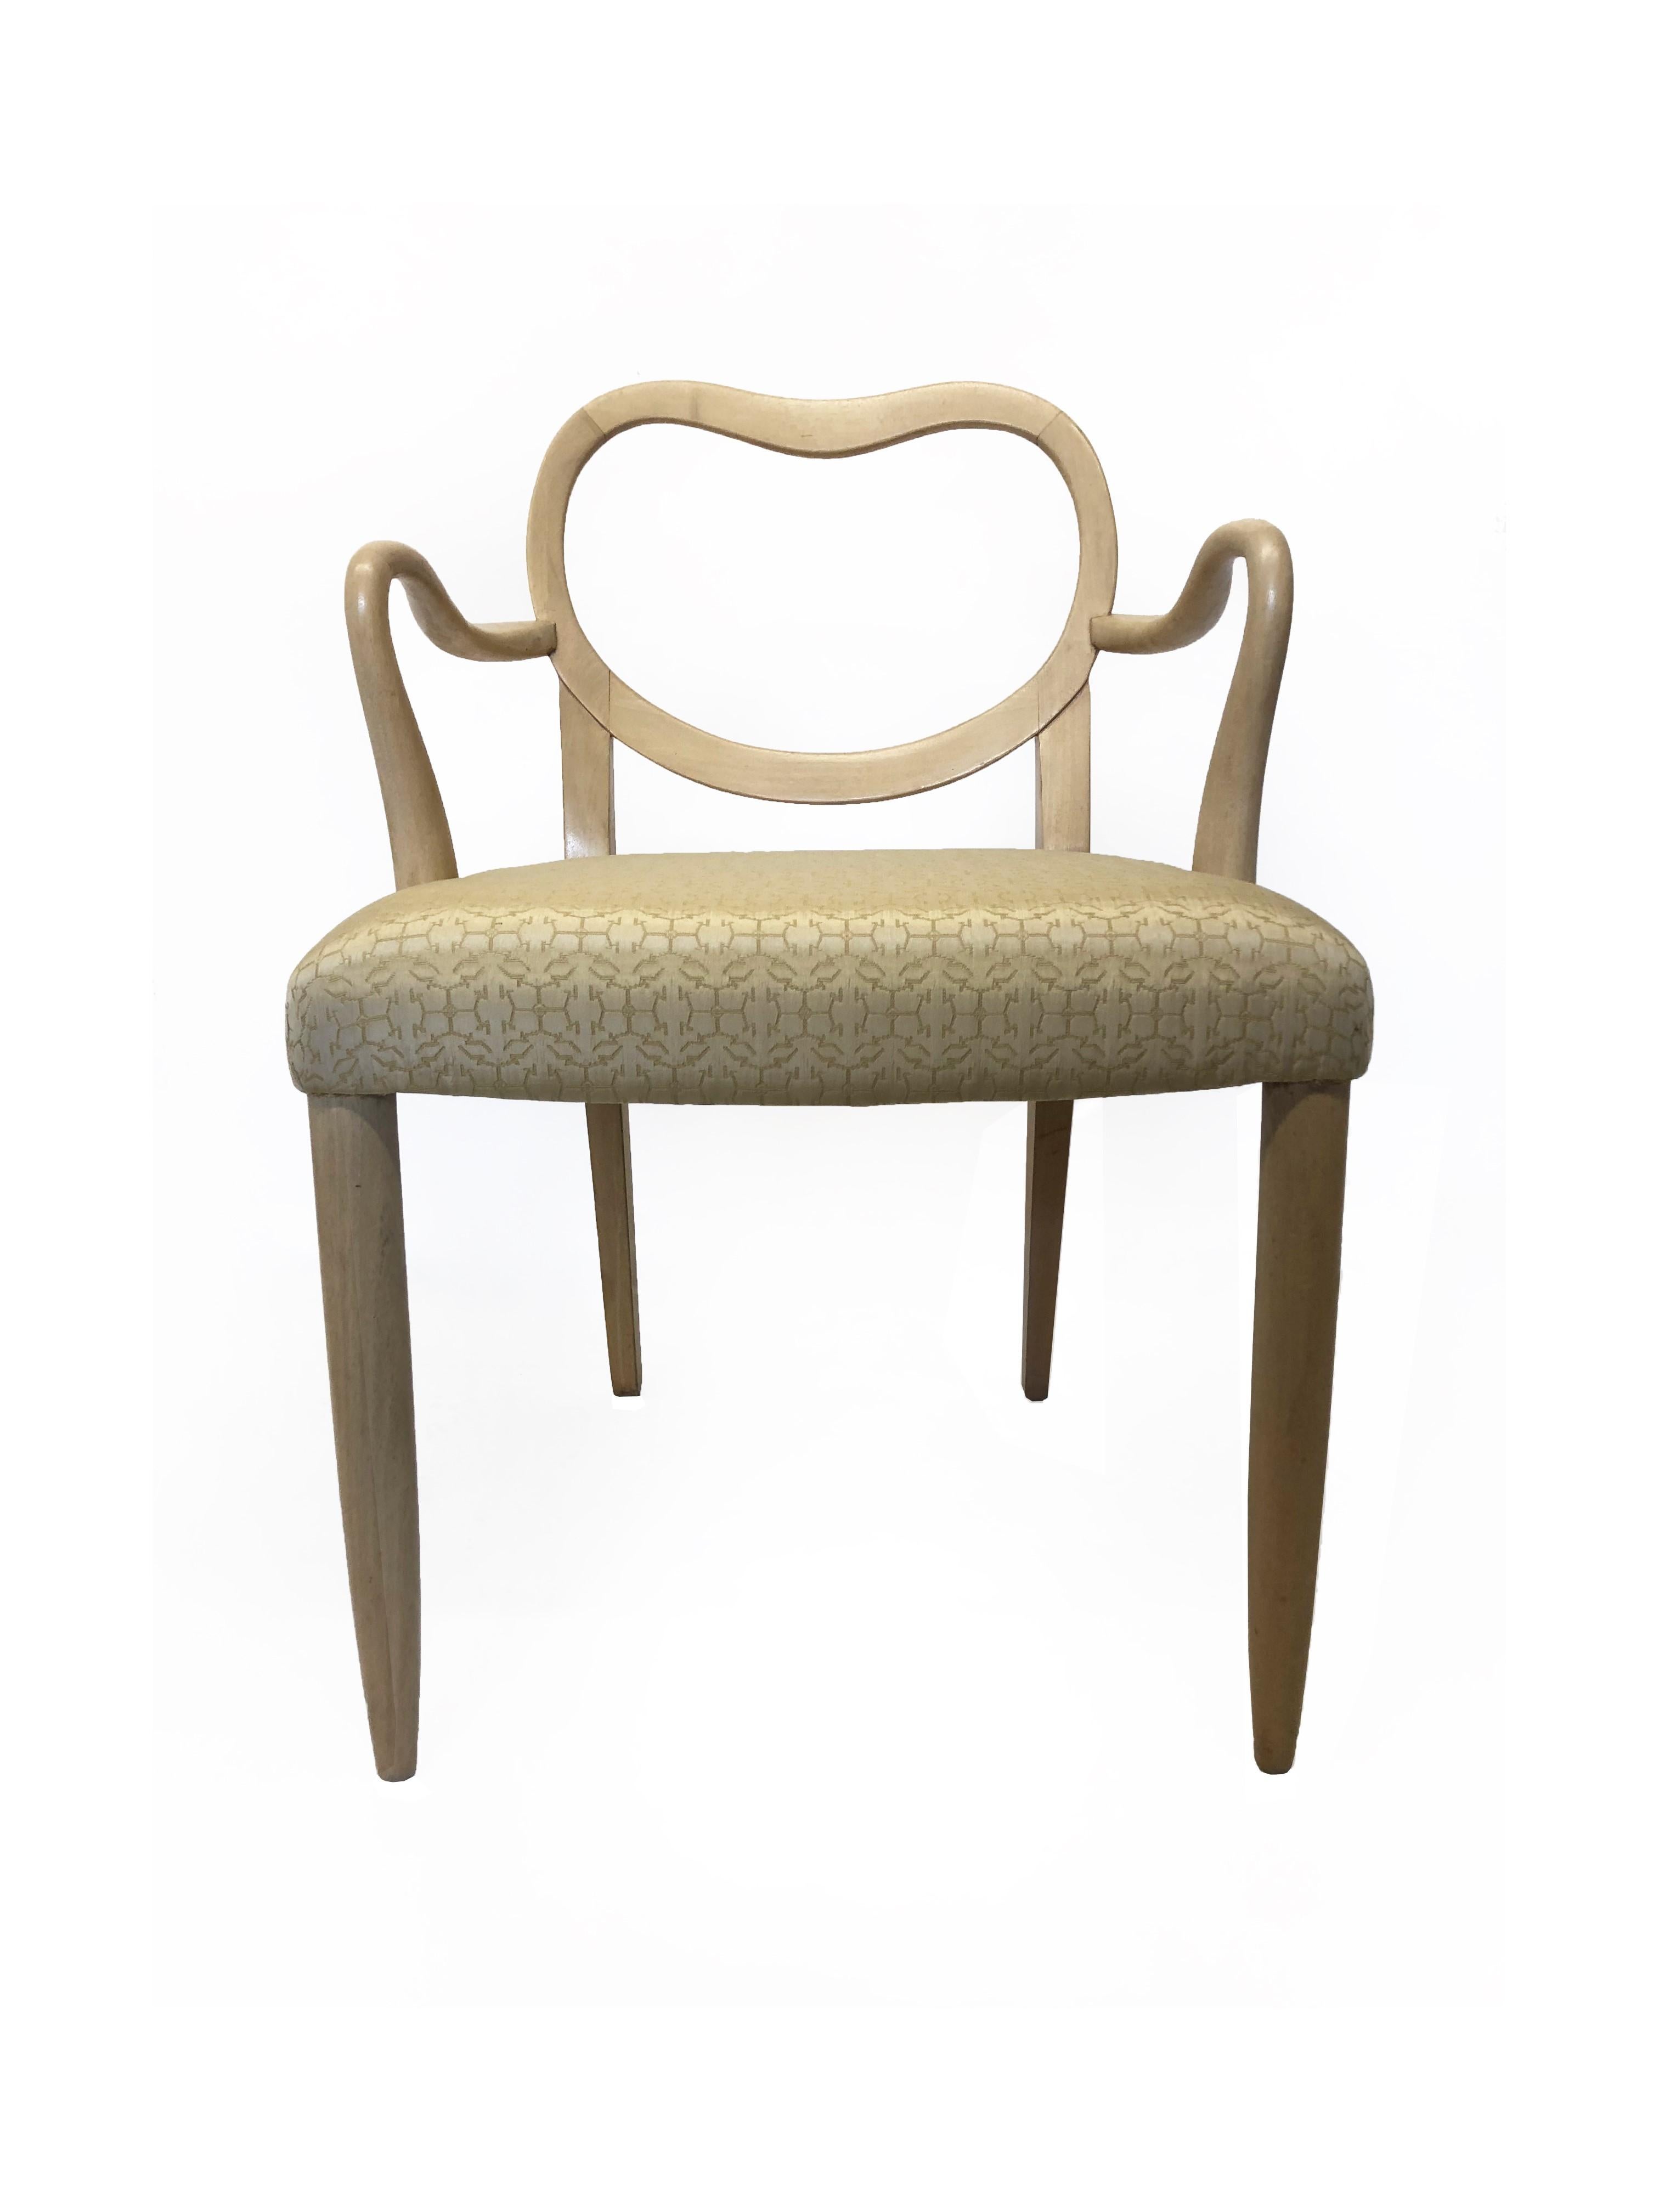 American Light Maple Armchair Upholstered in a Juan Montoya Design Fabric  For Sale